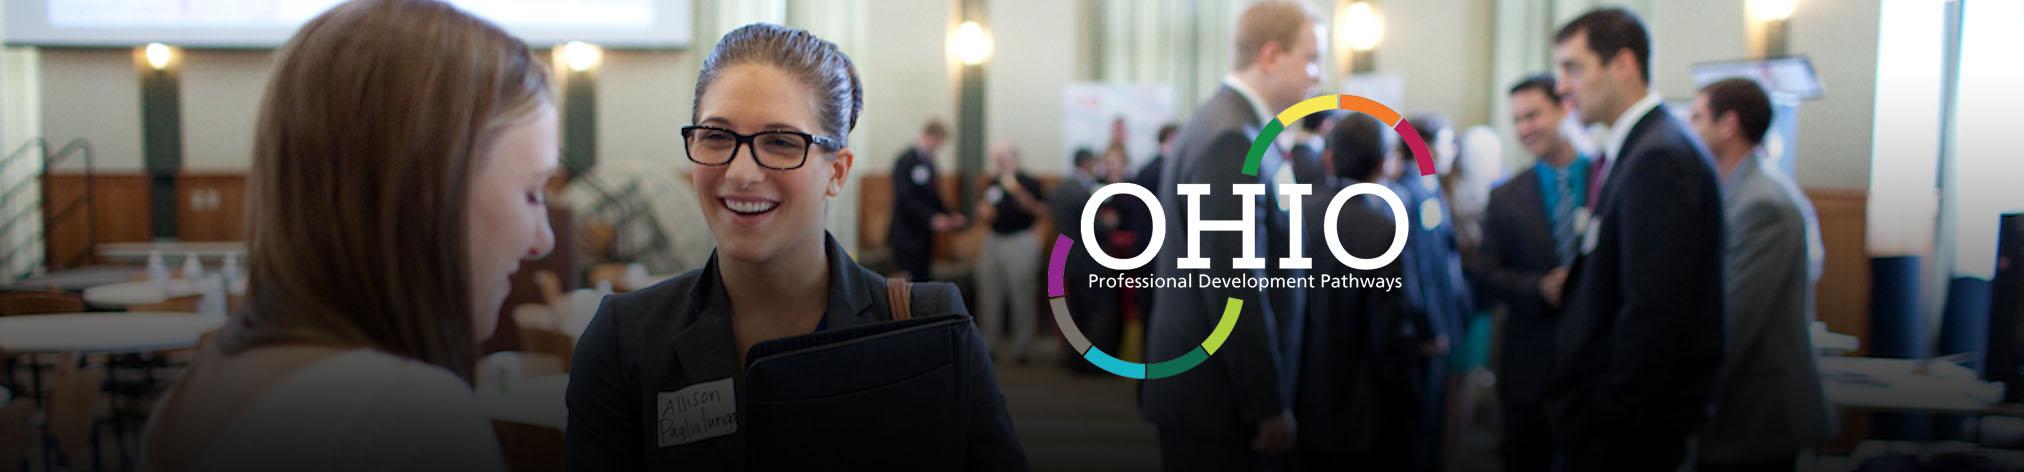 people attending an event and the professional development logo